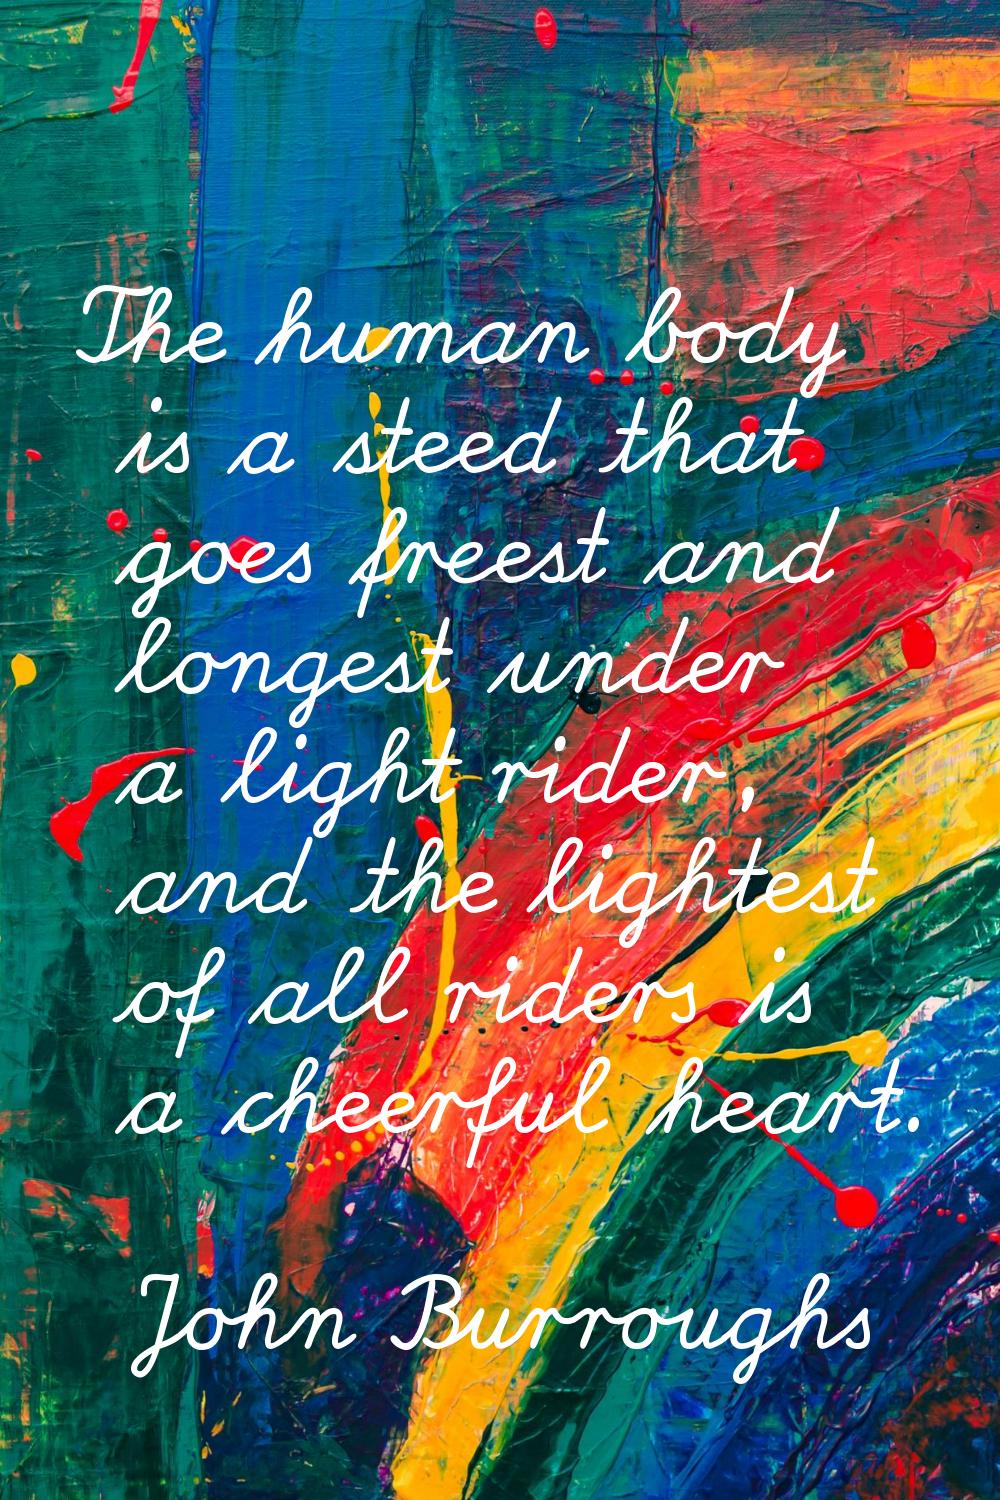 The human body is a steed that goes freest and longest under a light rider, and the lightest of all